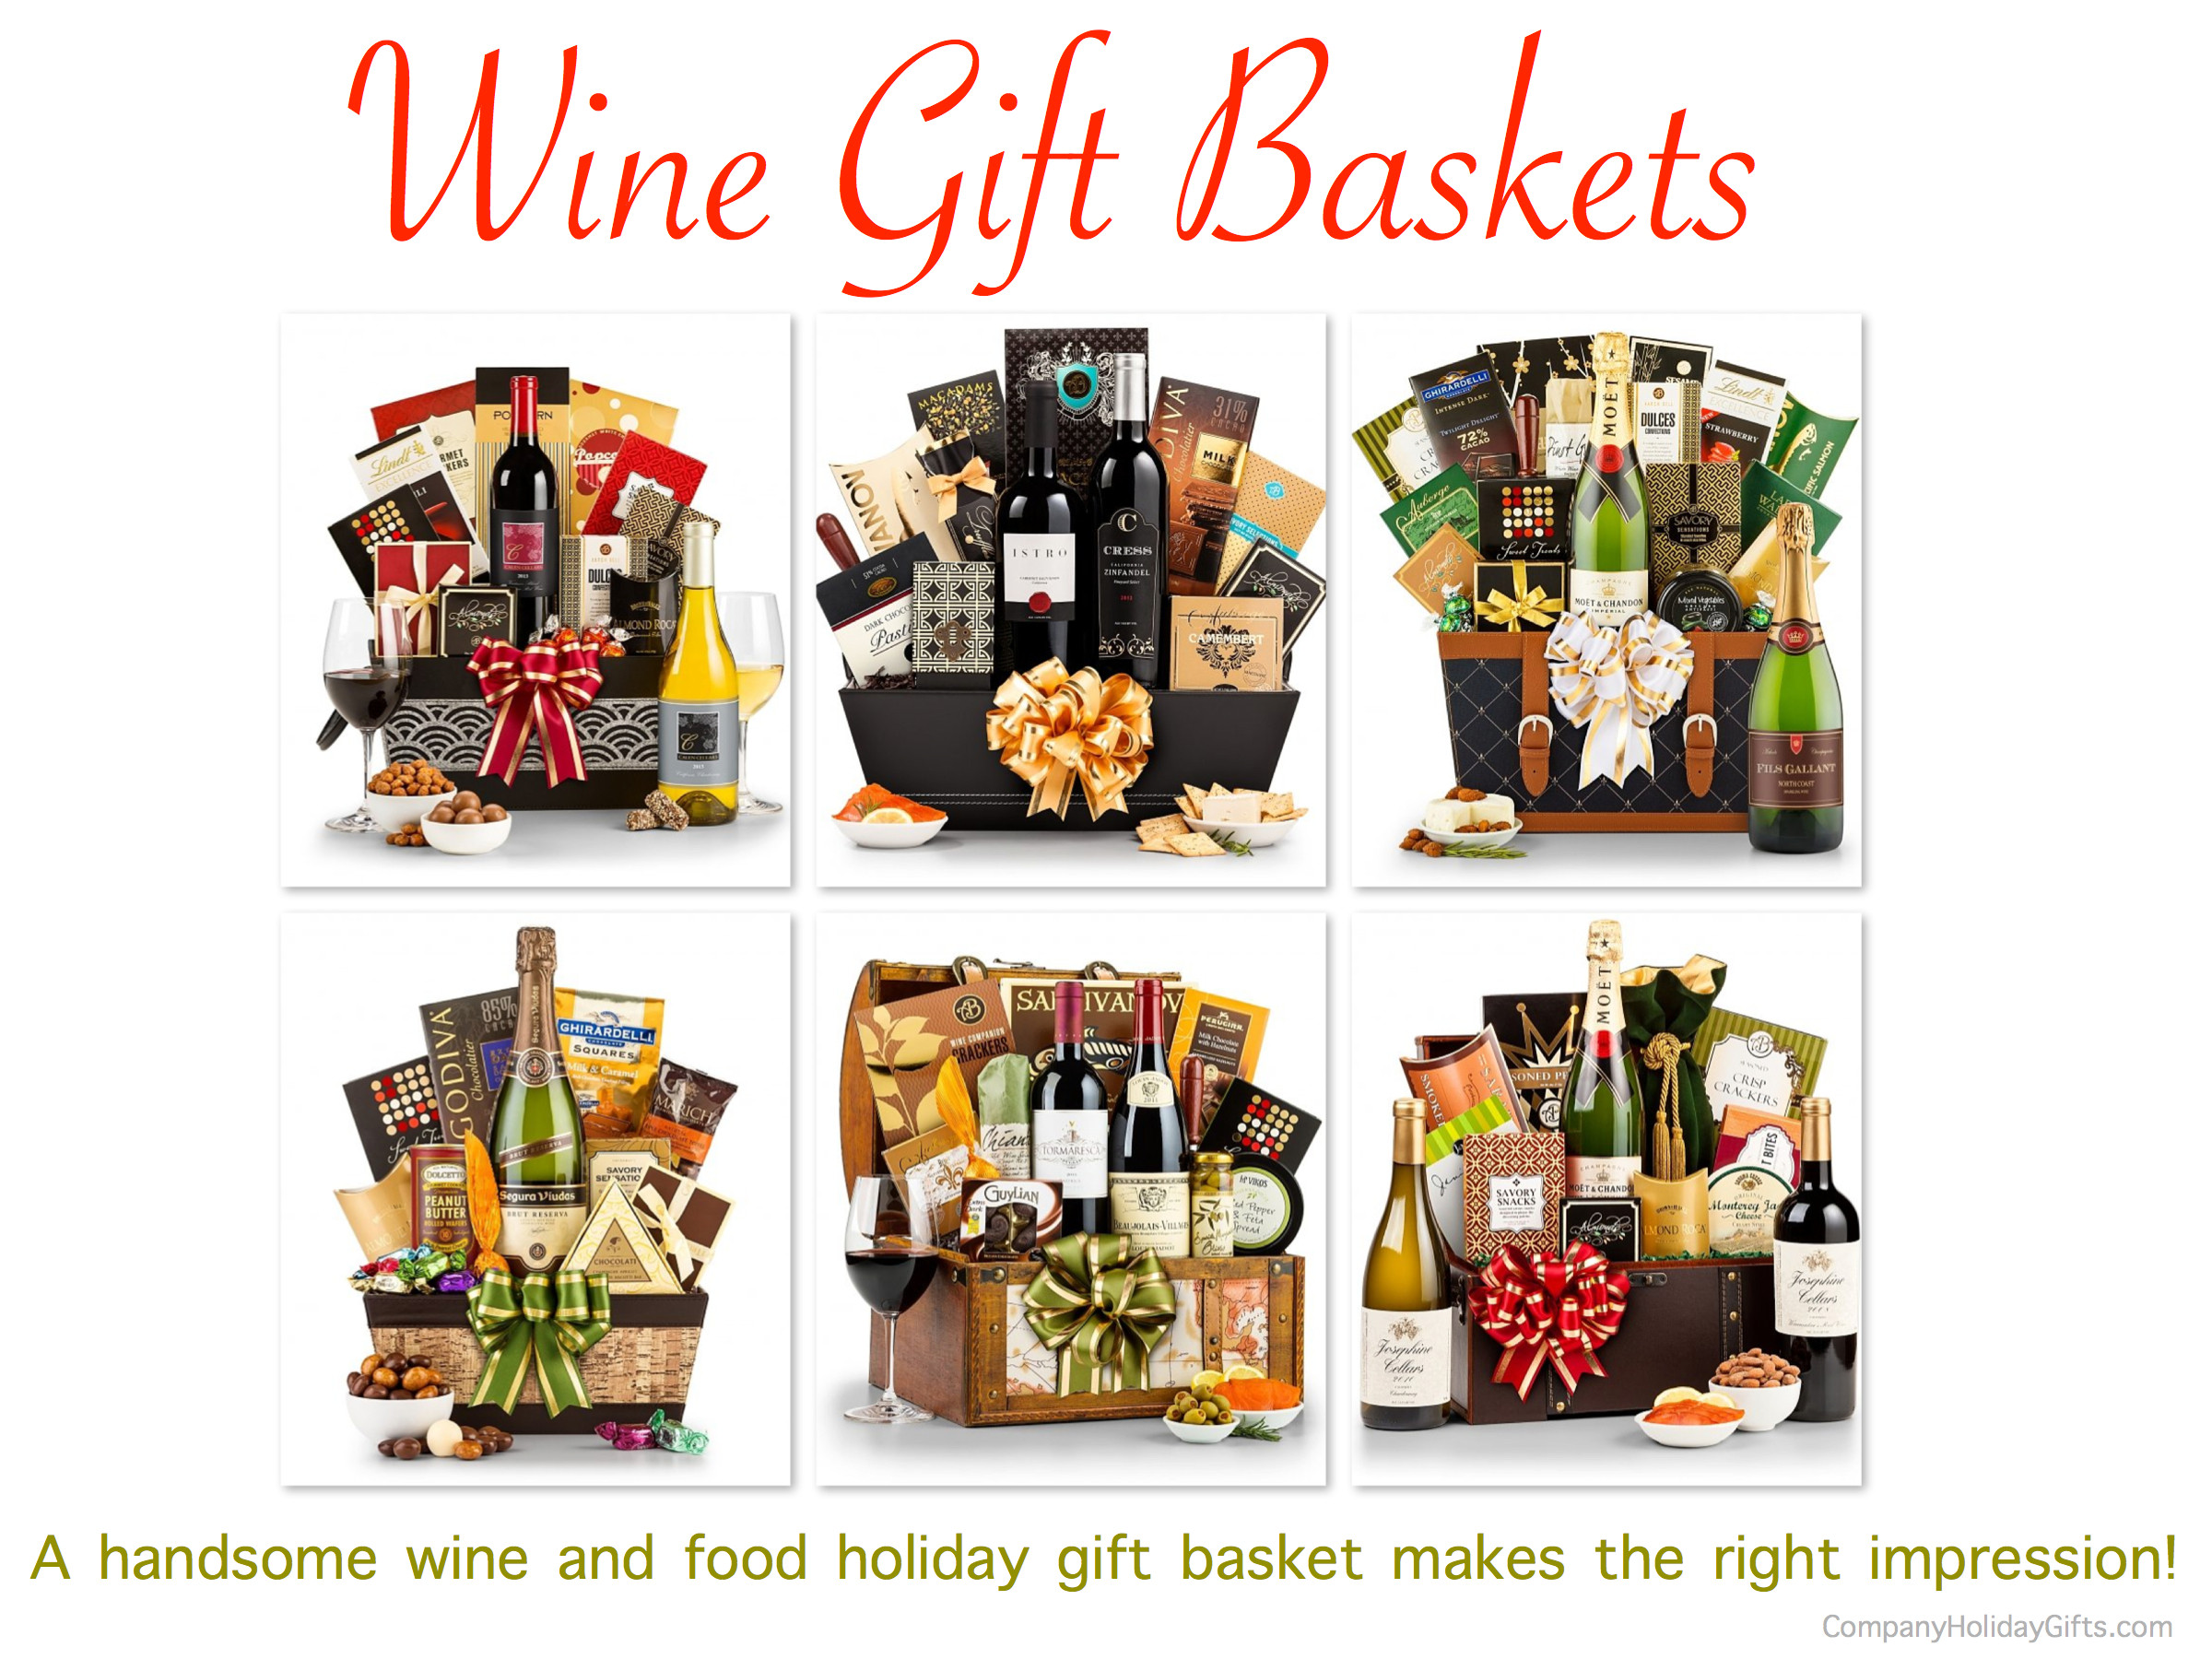 Business Holiday Gift Ideas For Clients
 Best Holiday Gifts for Business Associates & Clients